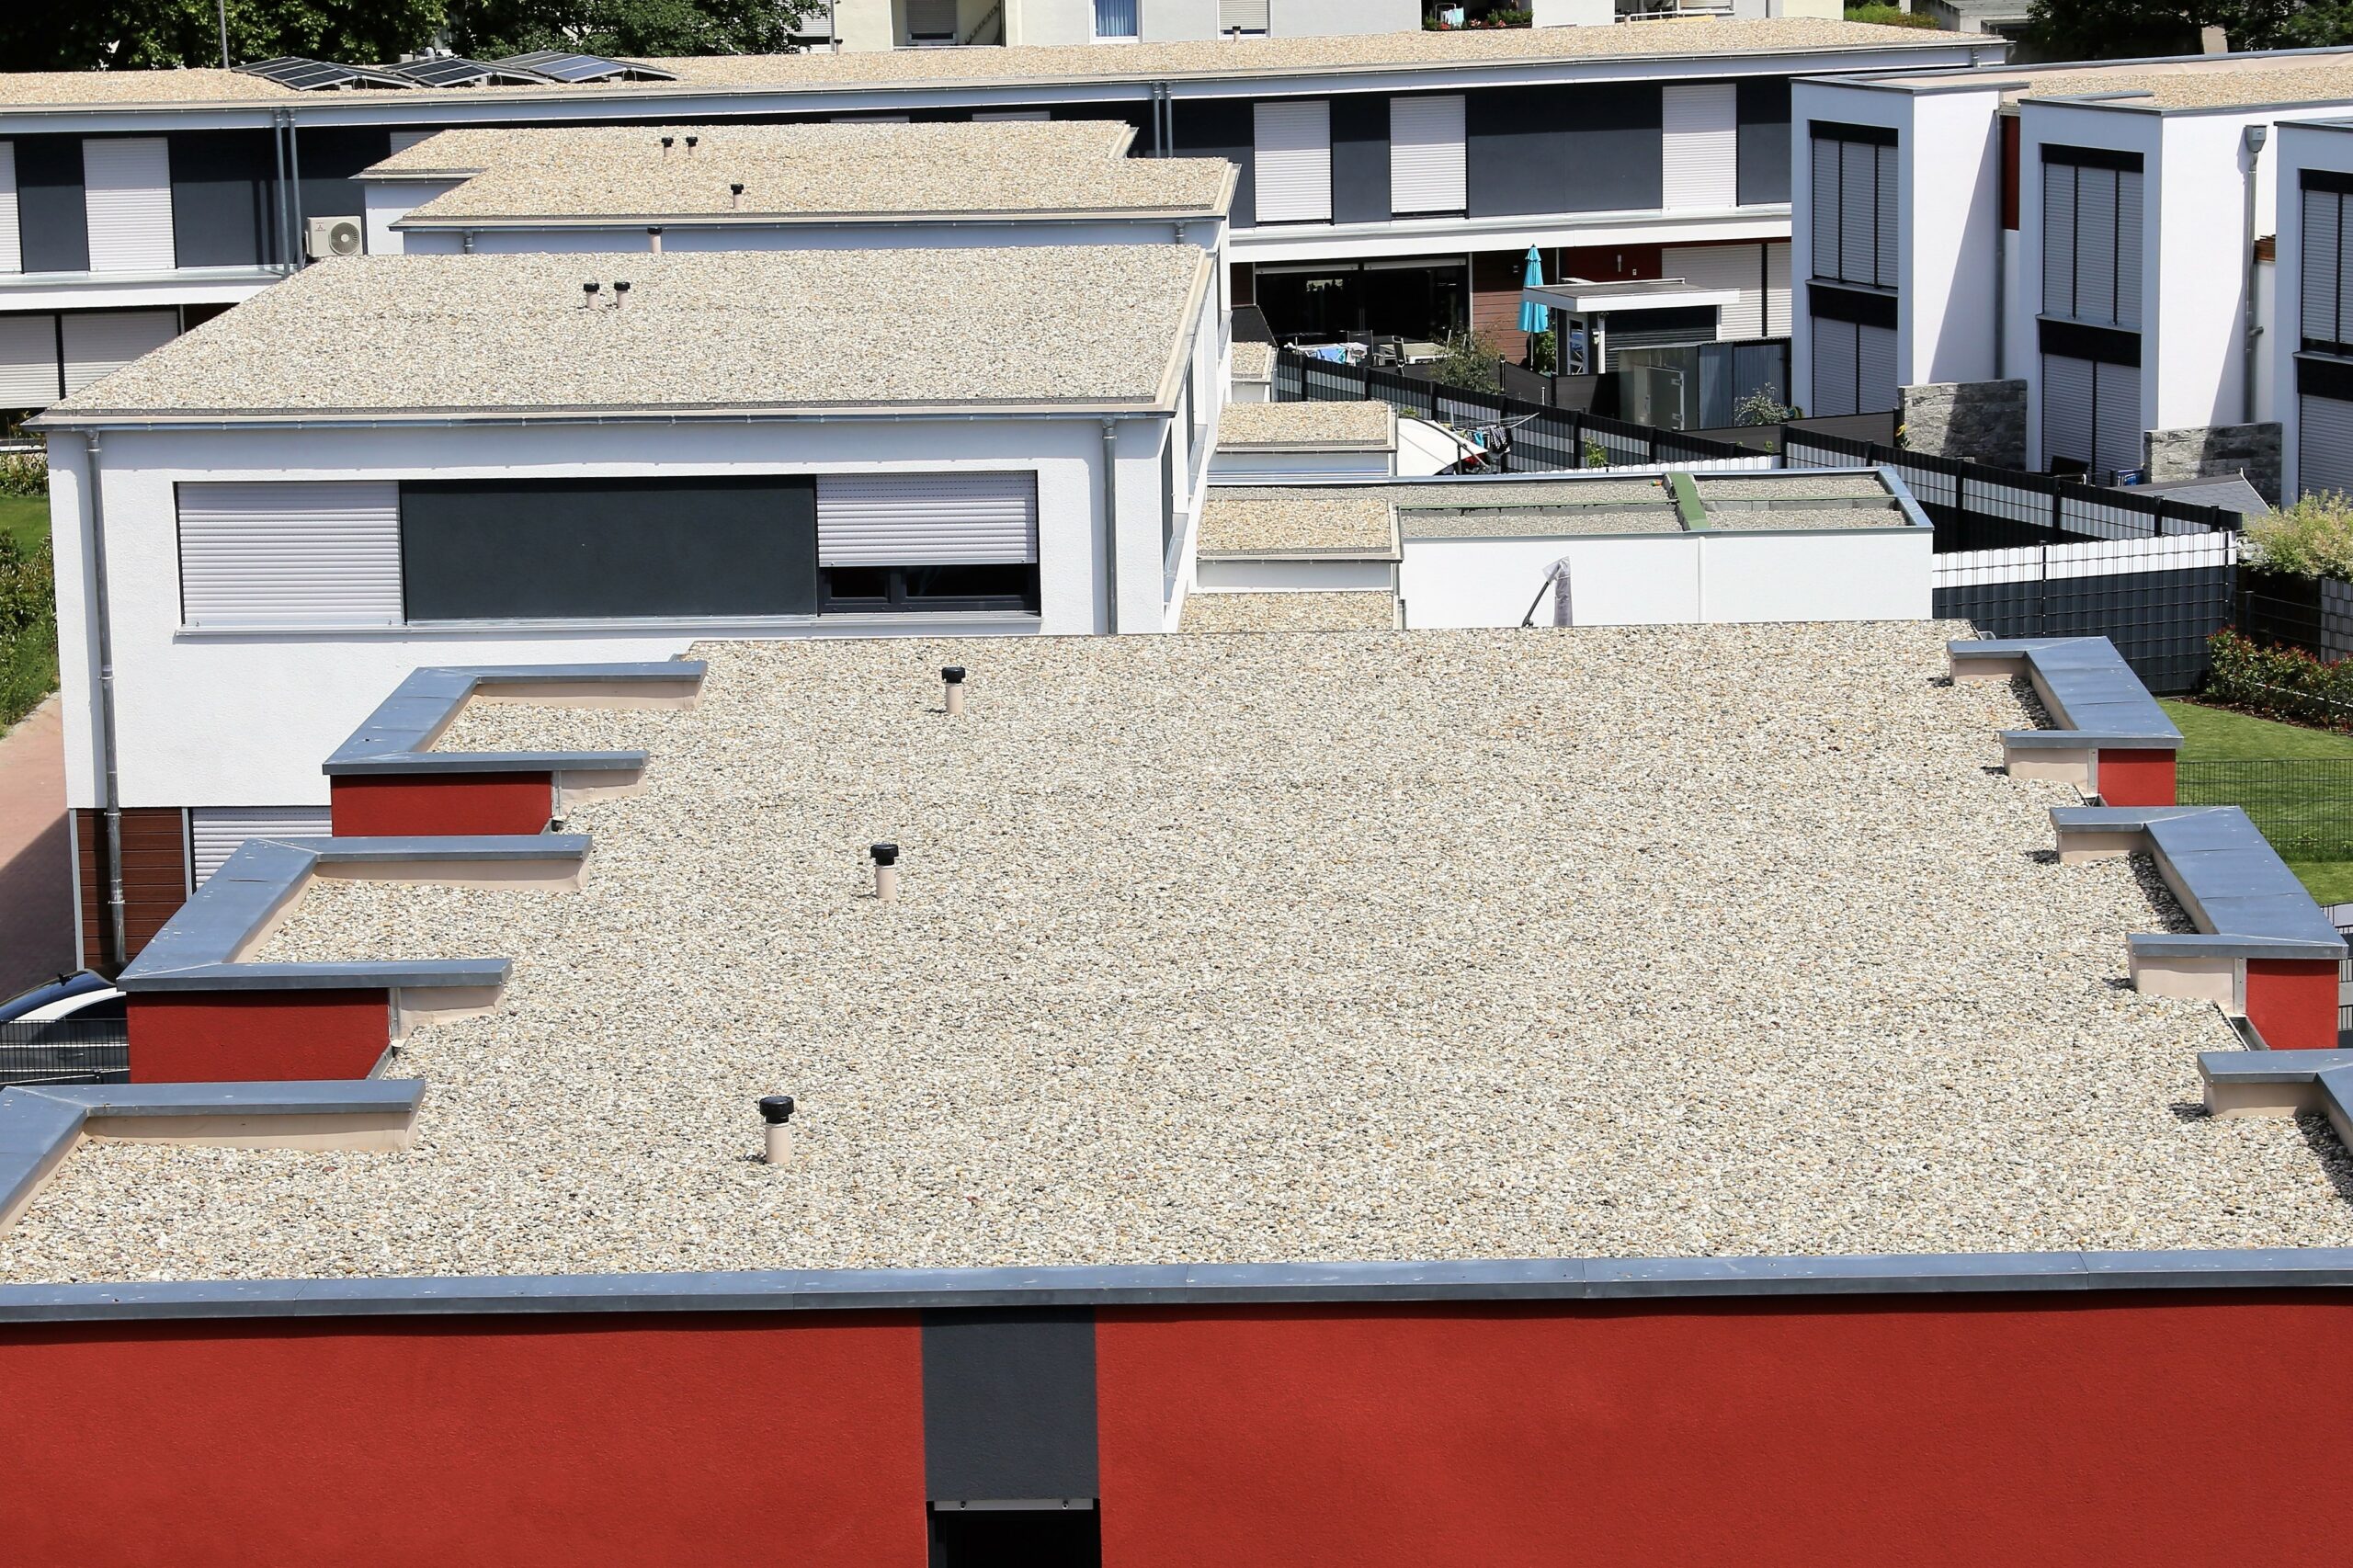 Redline Contracting can install flat roofing, including customized flat roof projects, for your home or building in the Minneapolis metro area.